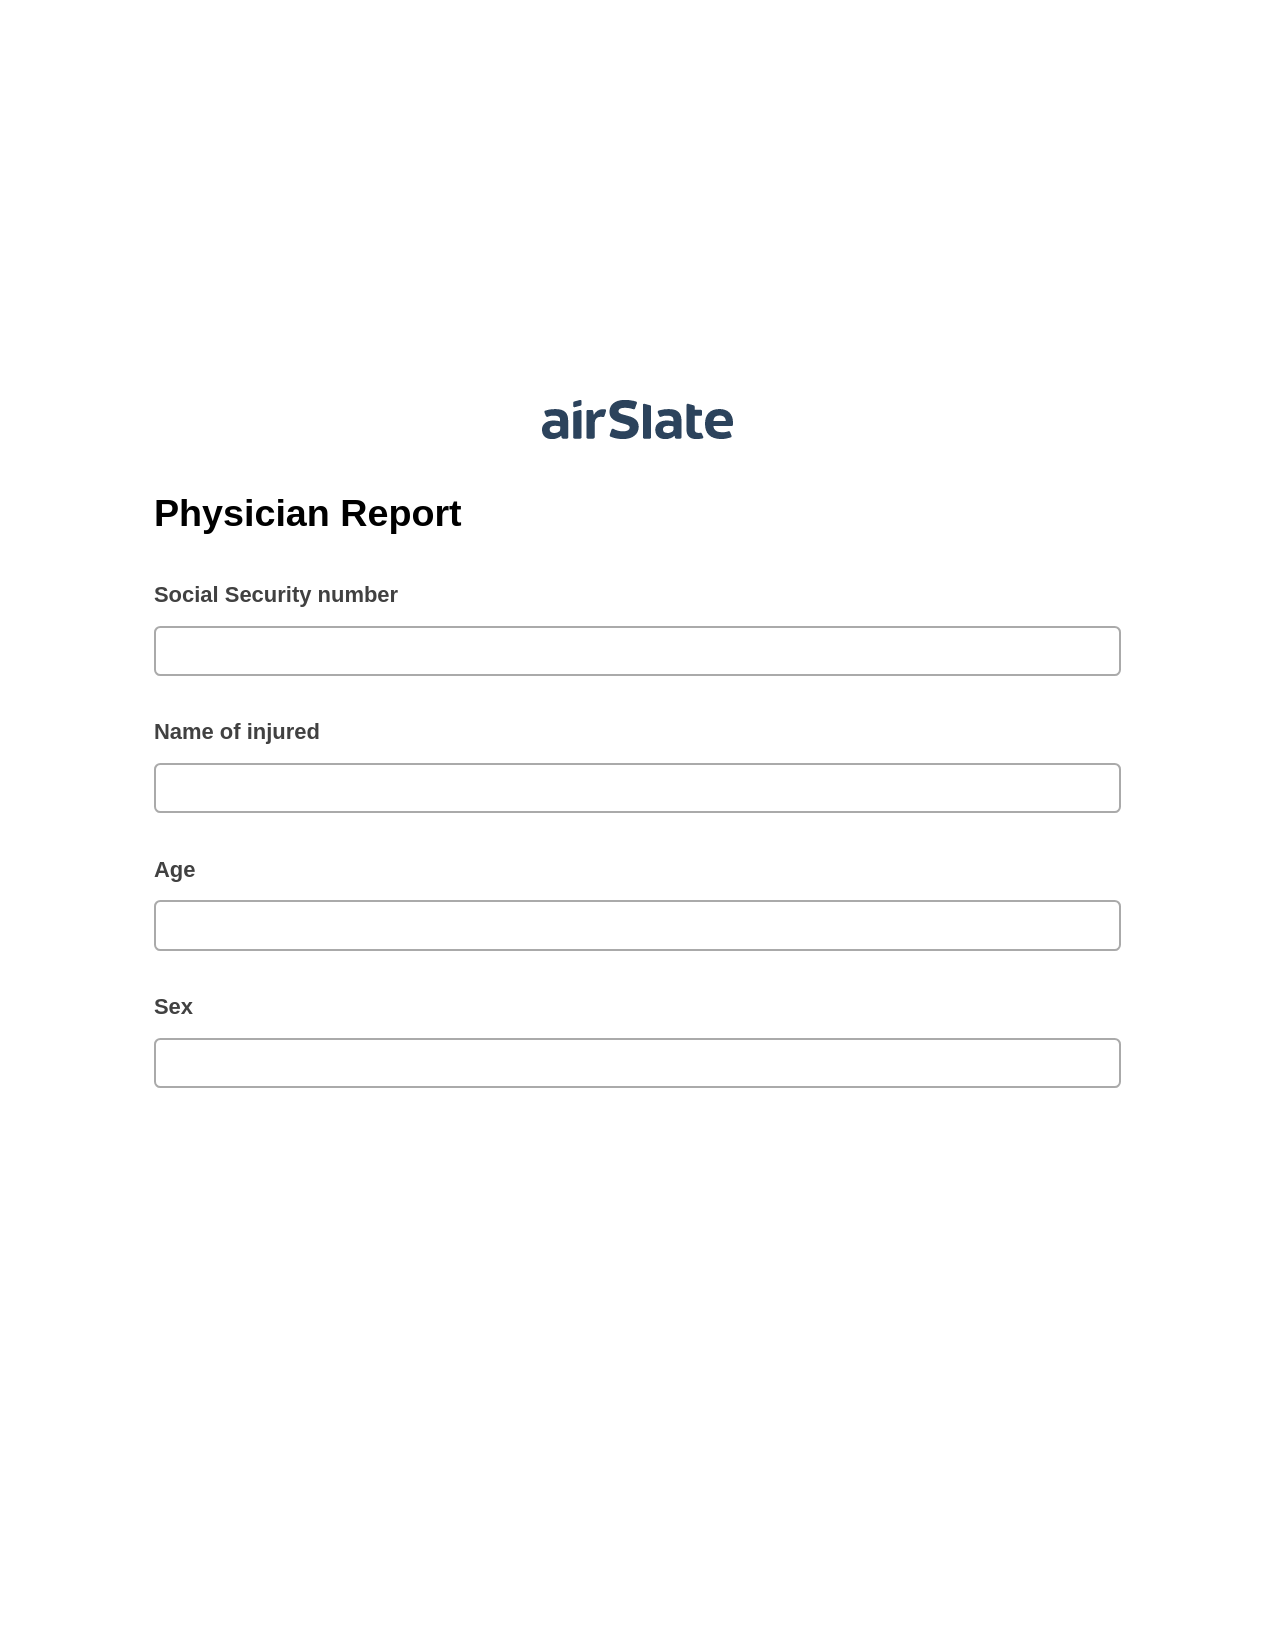 Physician Report Pre-fill Document Bot, Create MS Dynamics 365 Records Bot, Post-finish Document Bot